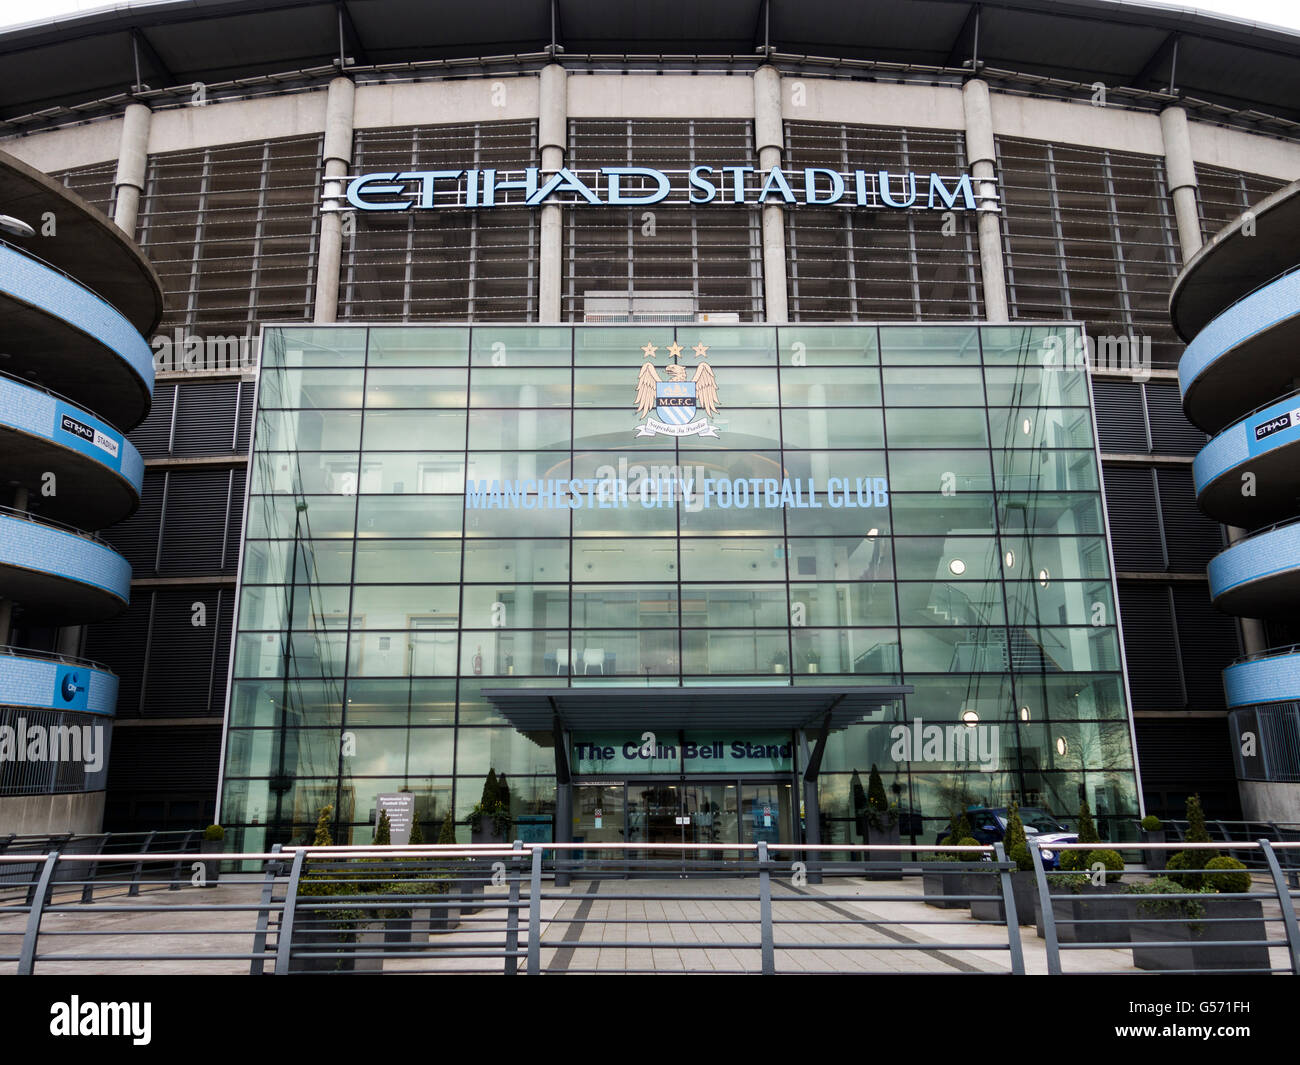 Etihad Stadium The Colin Bell Stand entrance Stock Photo